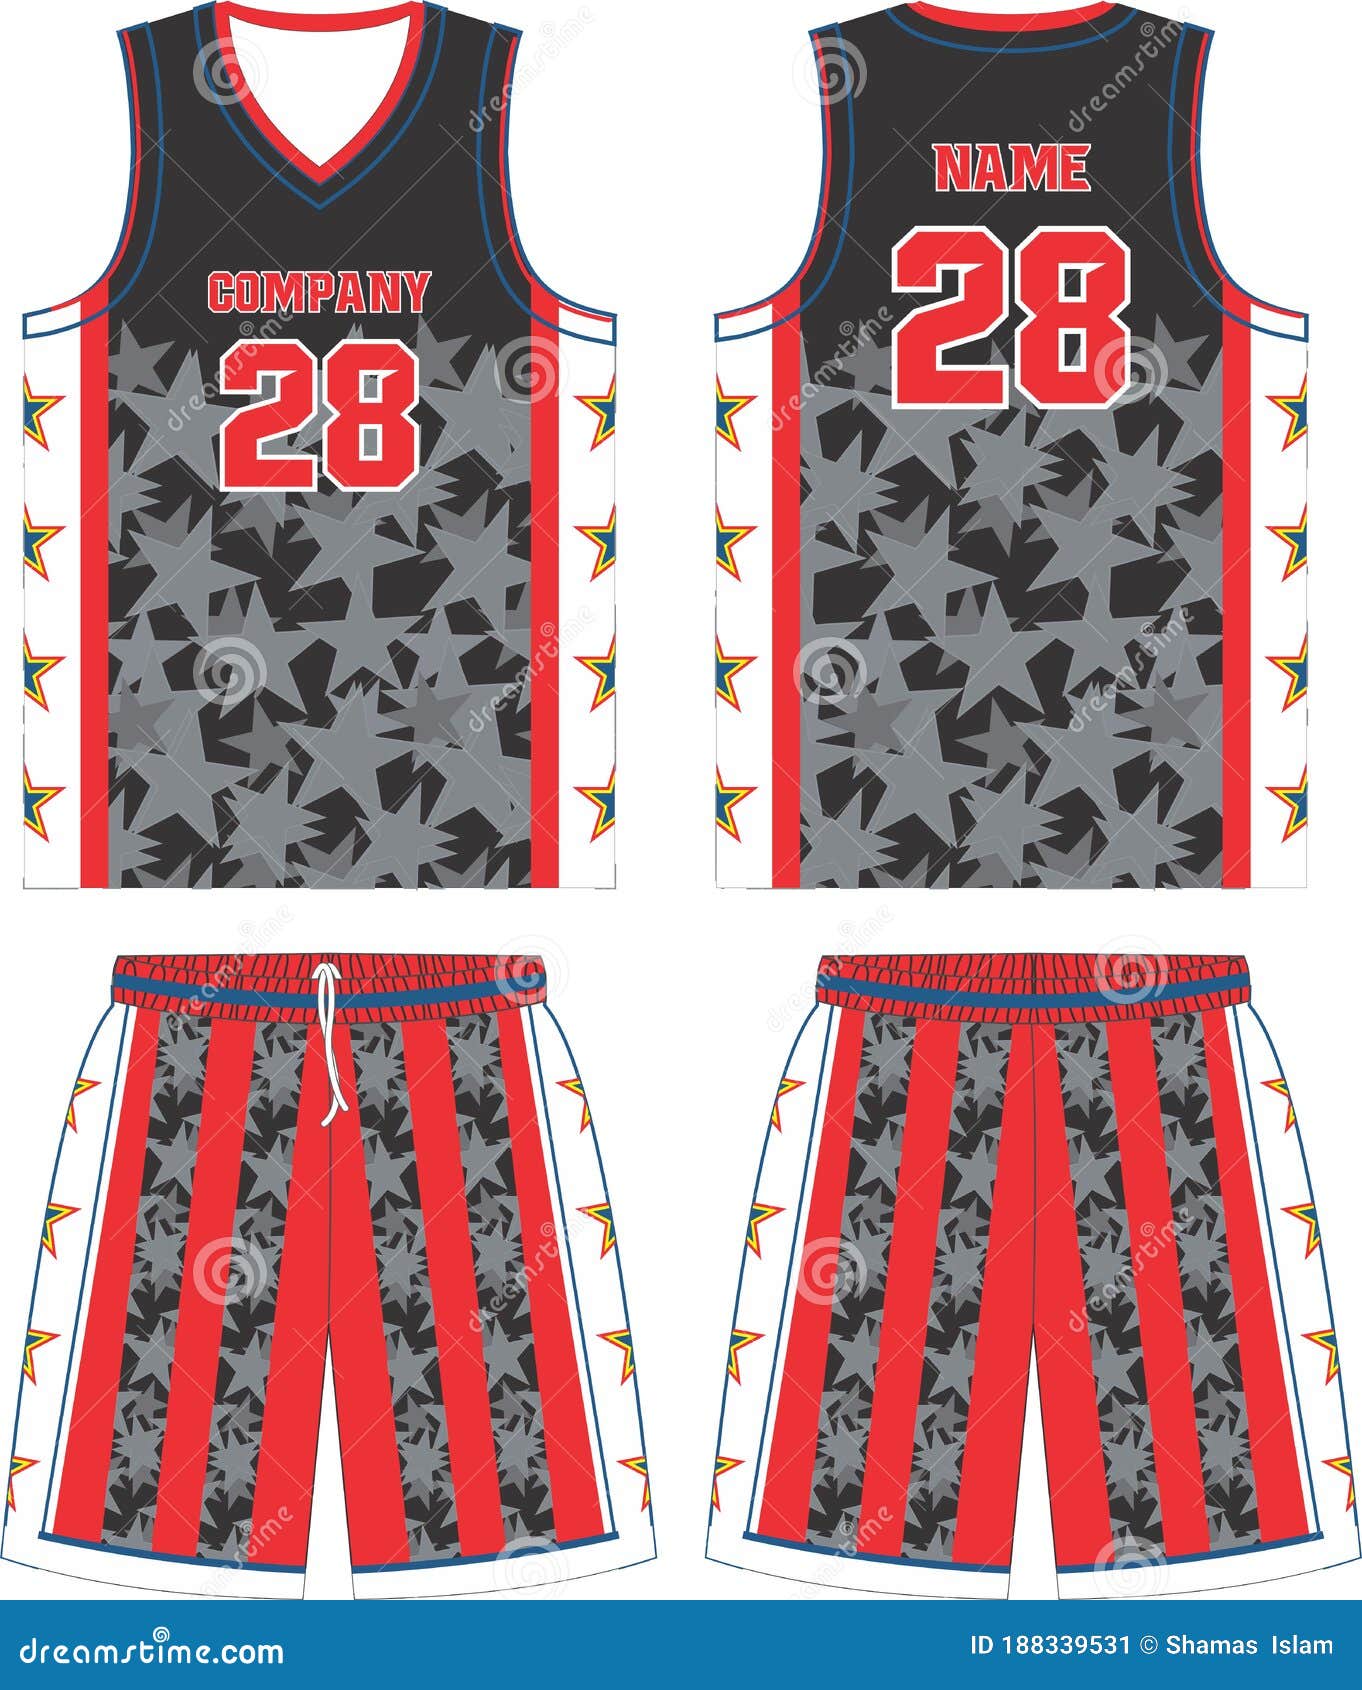 Basketball Jersey Design designs, themes, templates and